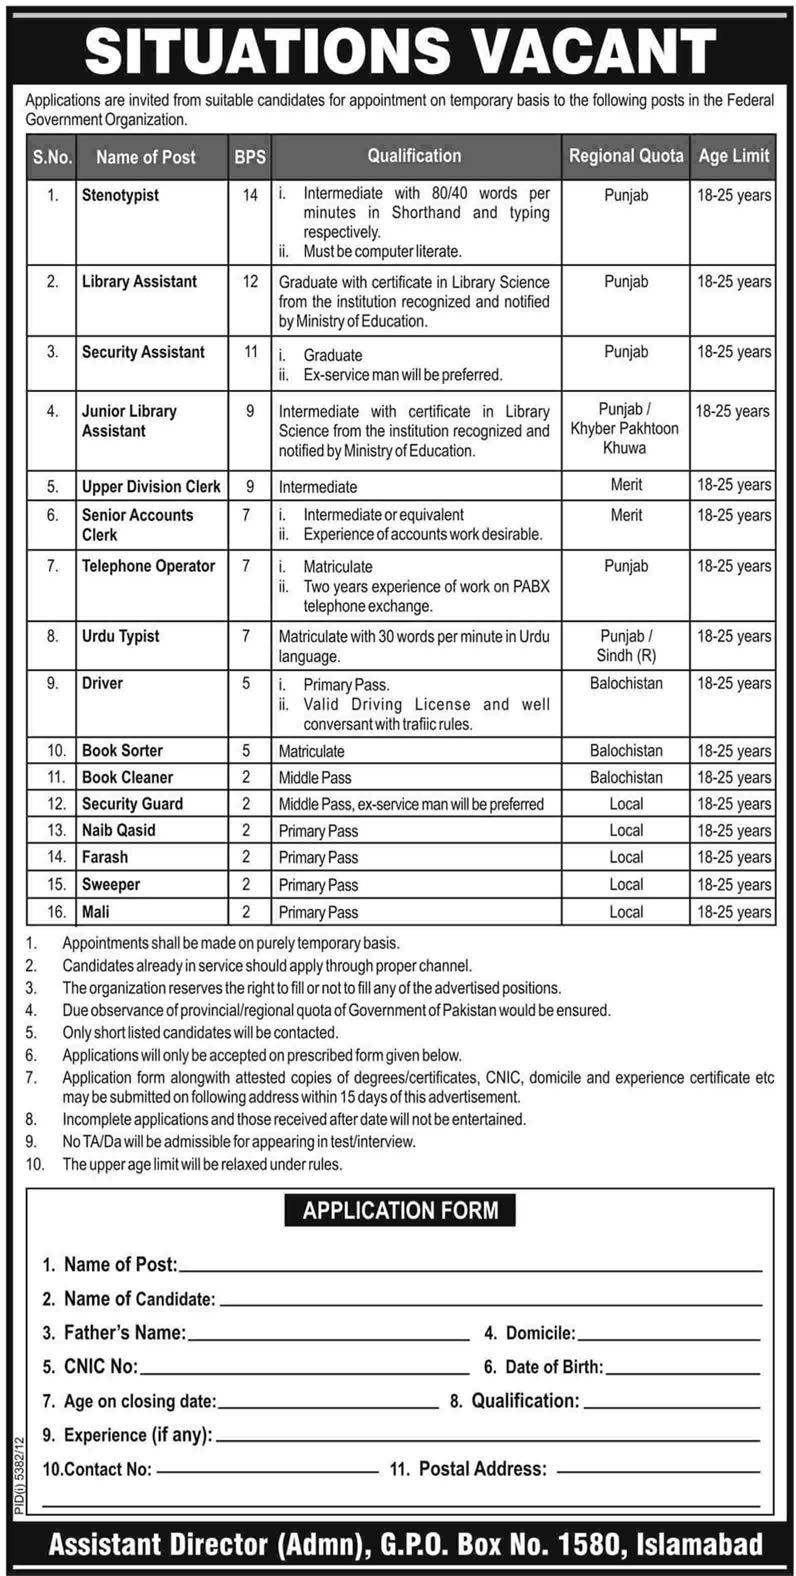 PO Box 1580 GPO Islamabad Jobs 2013 in Federal Government Organization Latest Advertisement